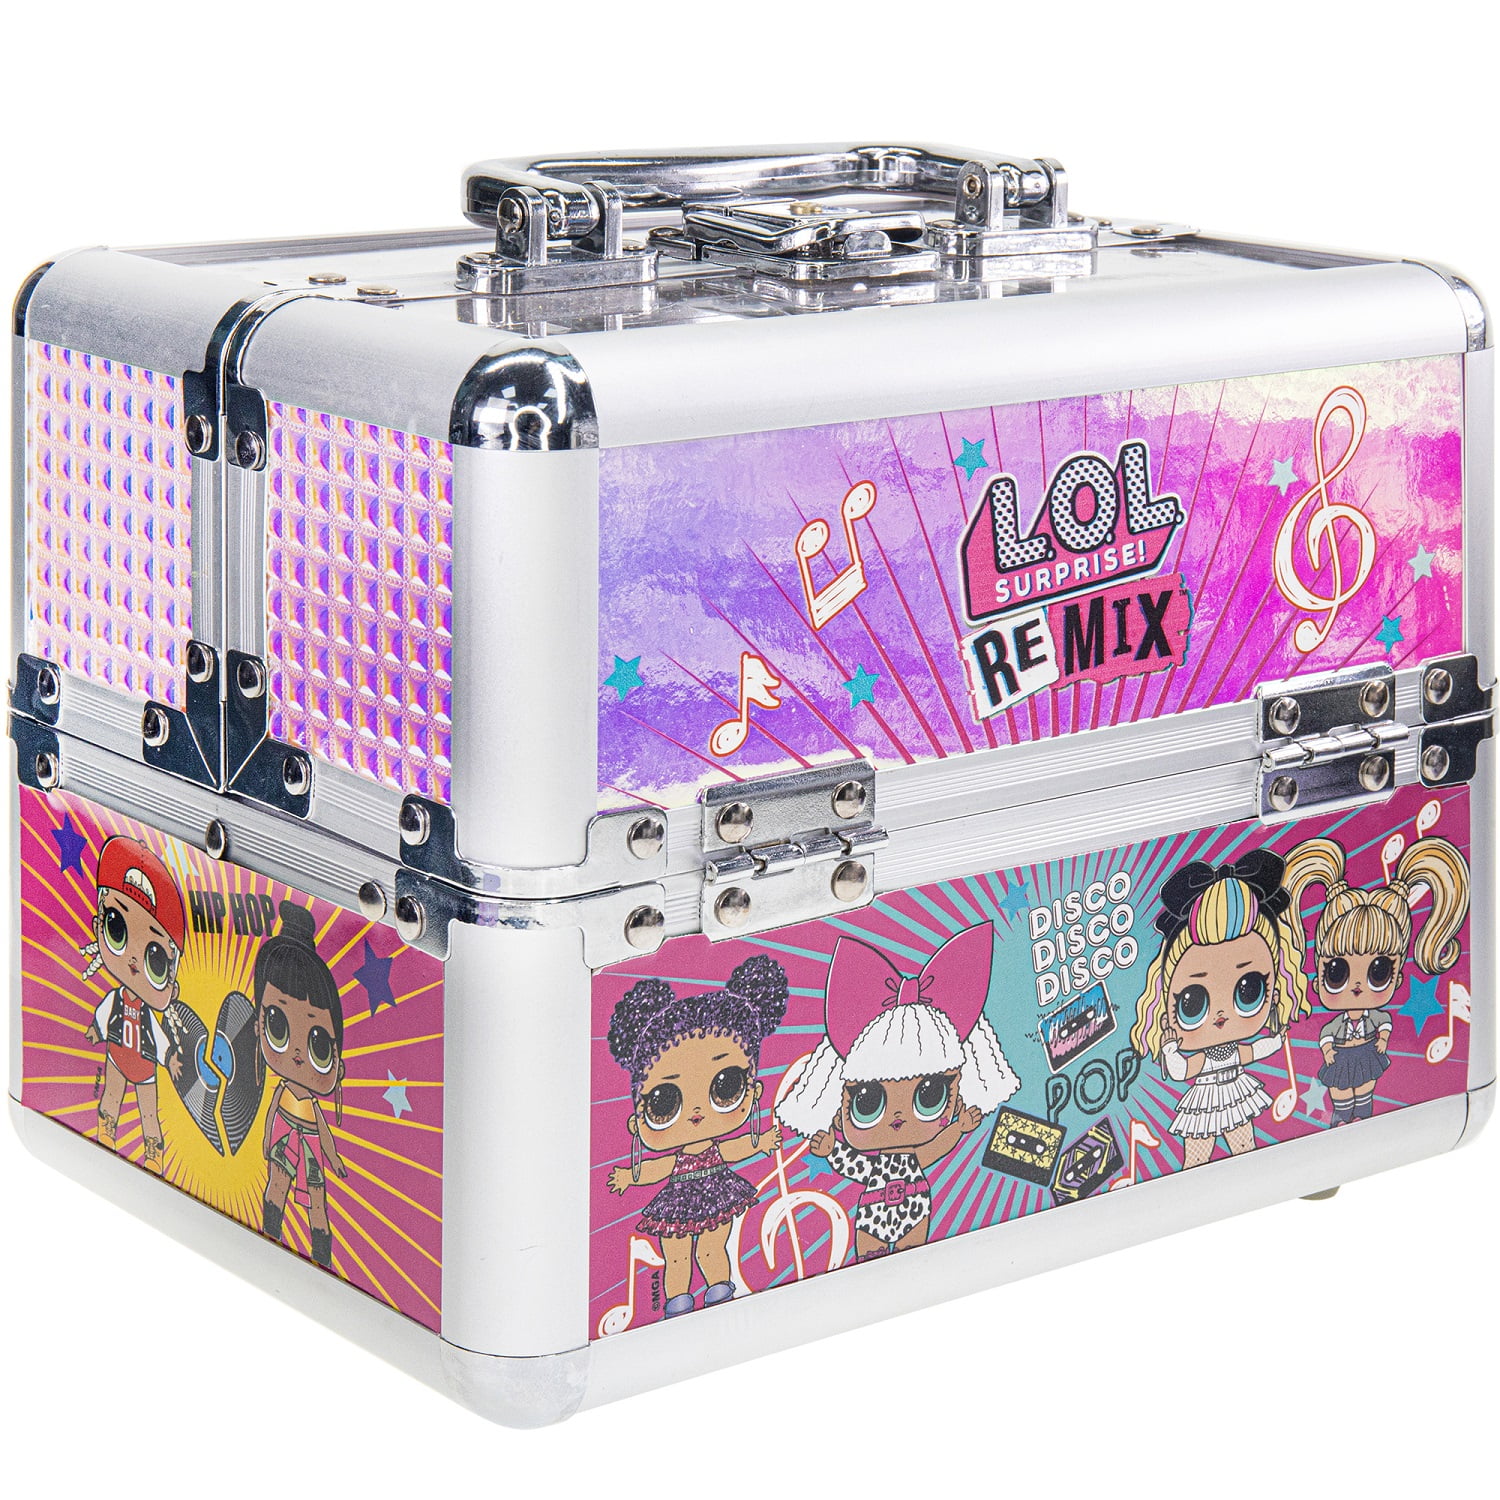 L.O.L Surprise! Townley Girl Train Case Cosmetic Makeup Set, Pretend Play Toy and Gift for Girls, Ages 5+